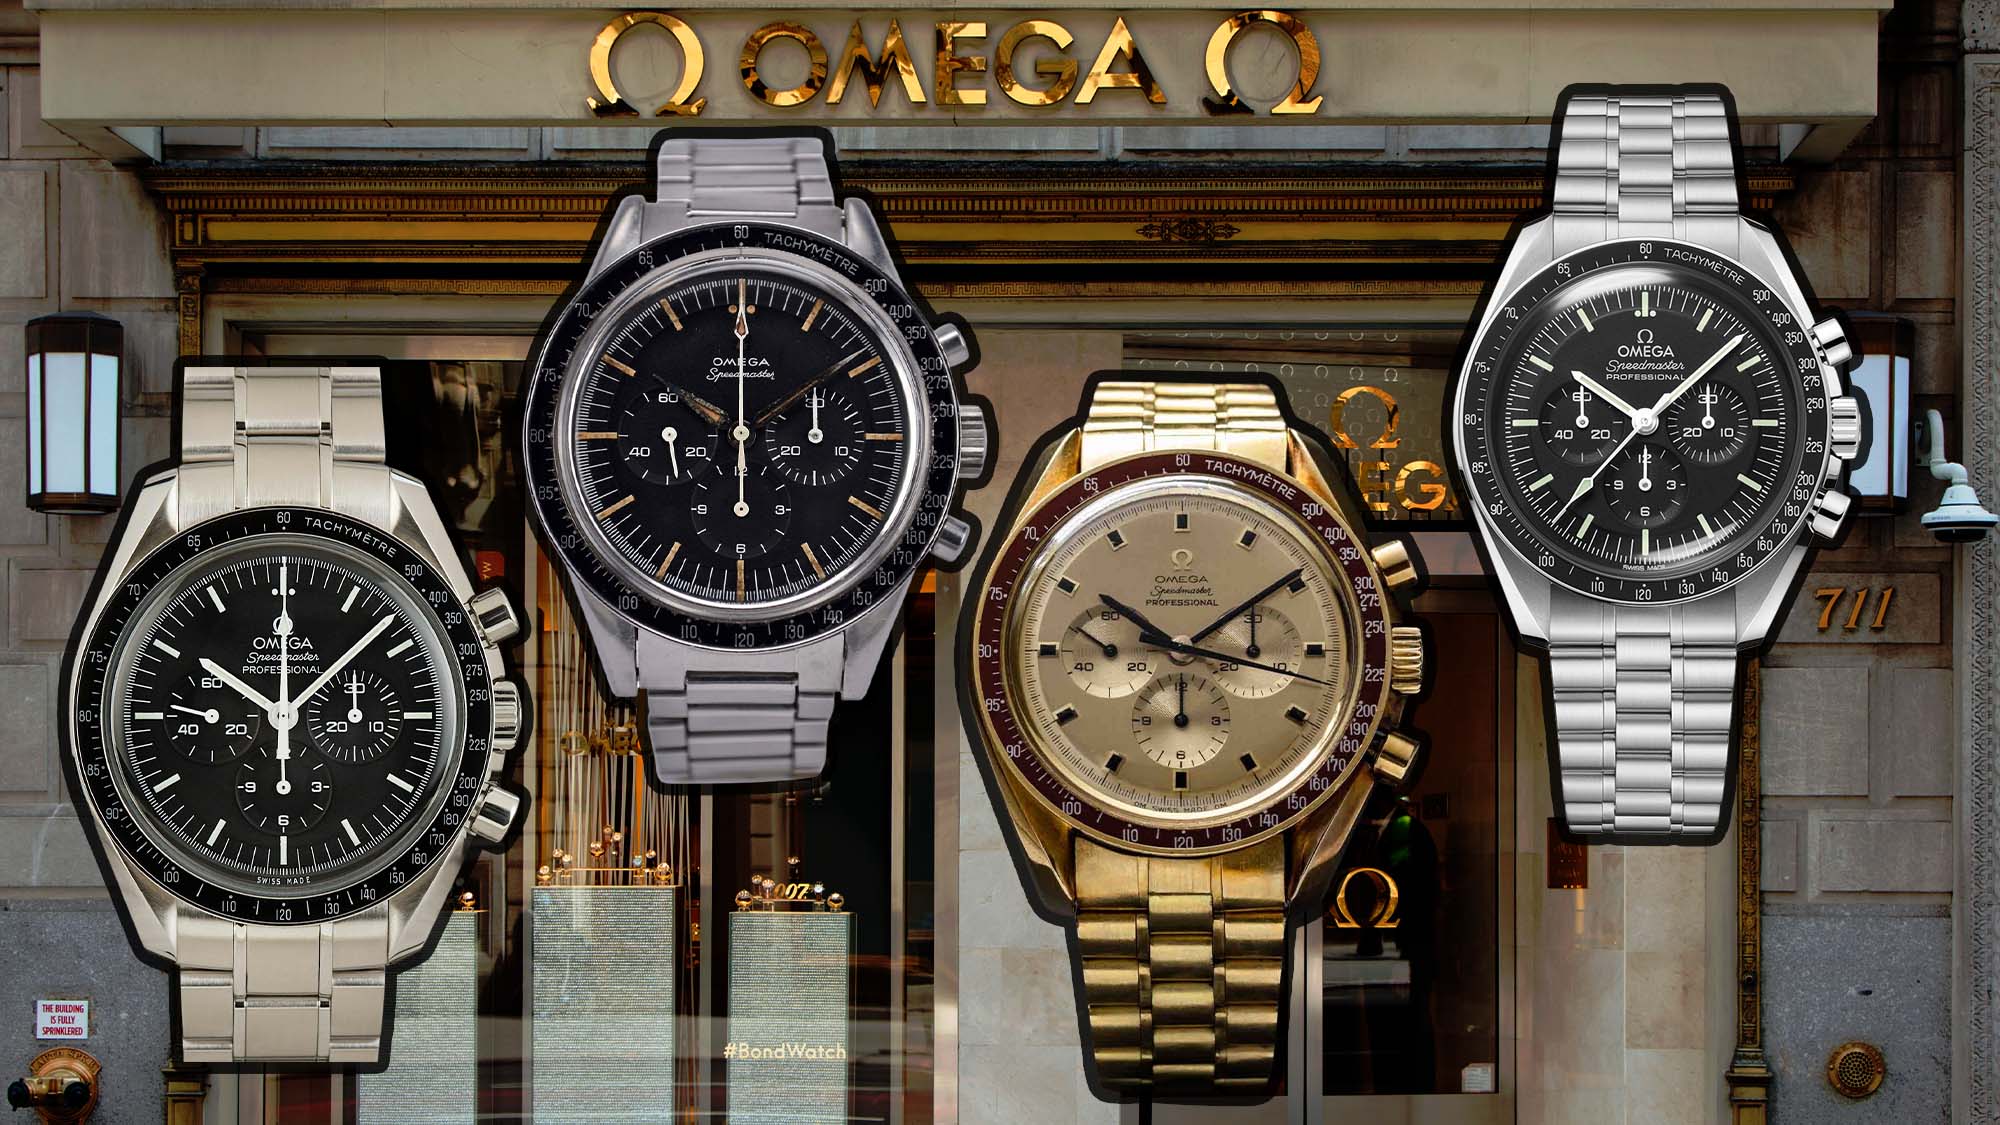 The Omega Speedmaster buying guide.